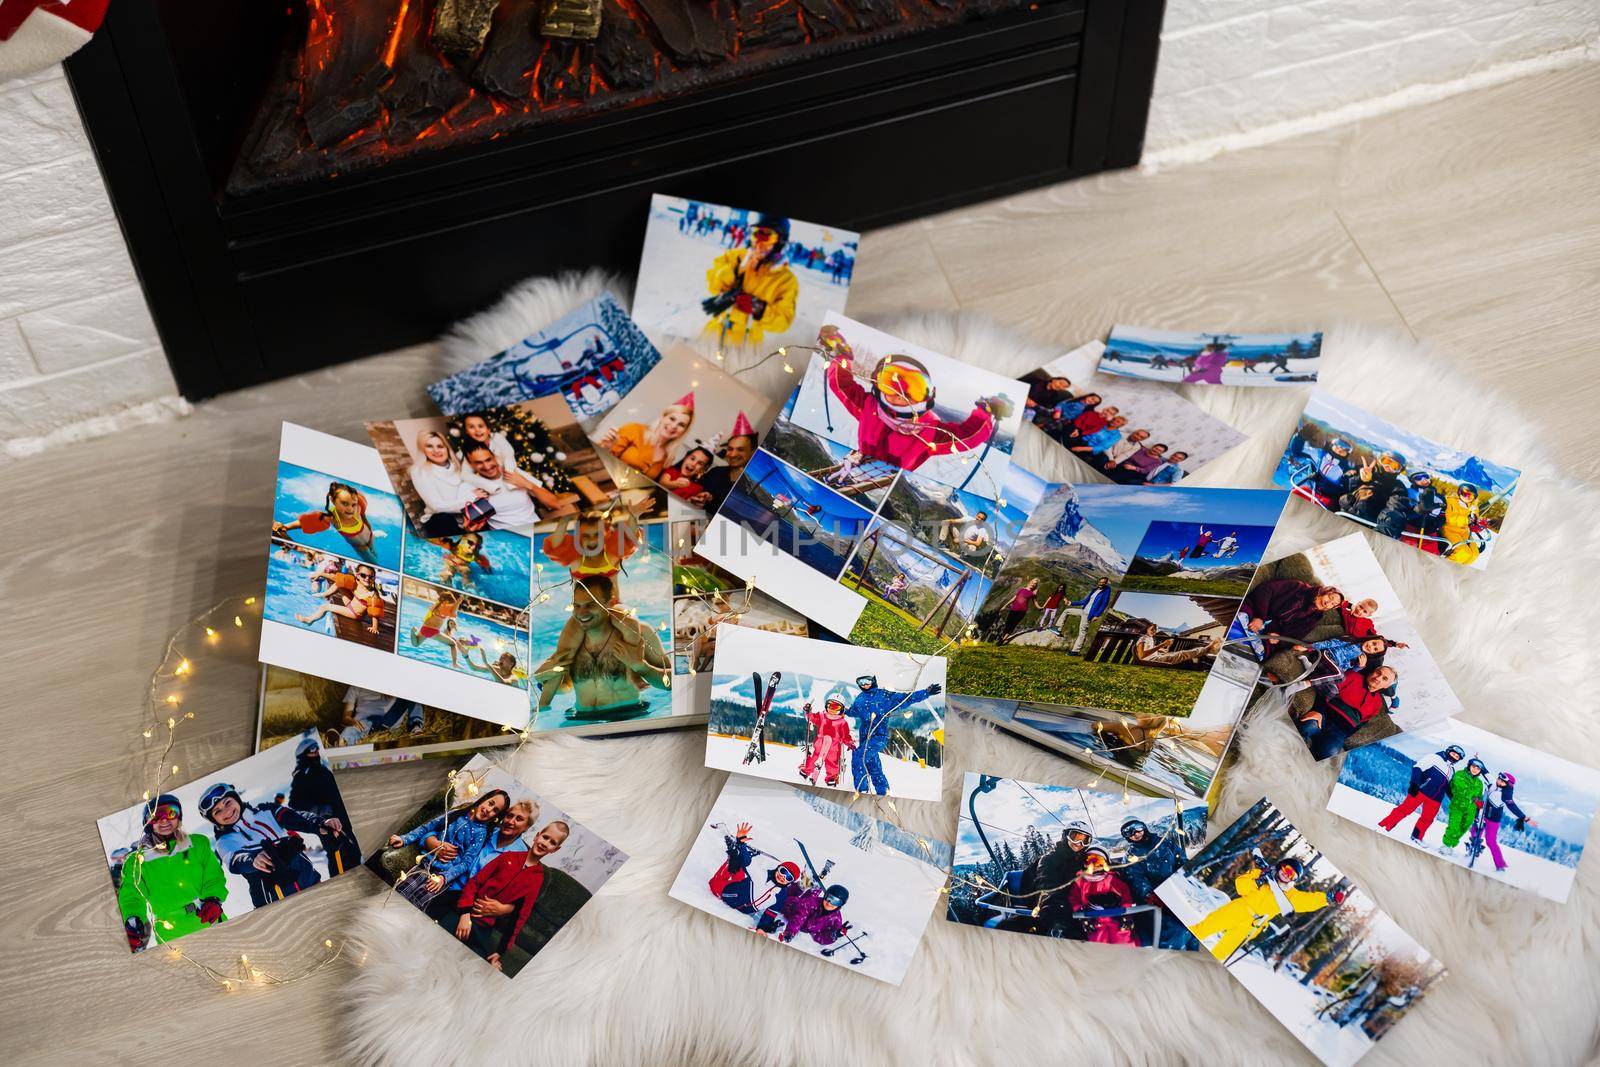 photo books lie near the fireplace at christmas by Andelov13